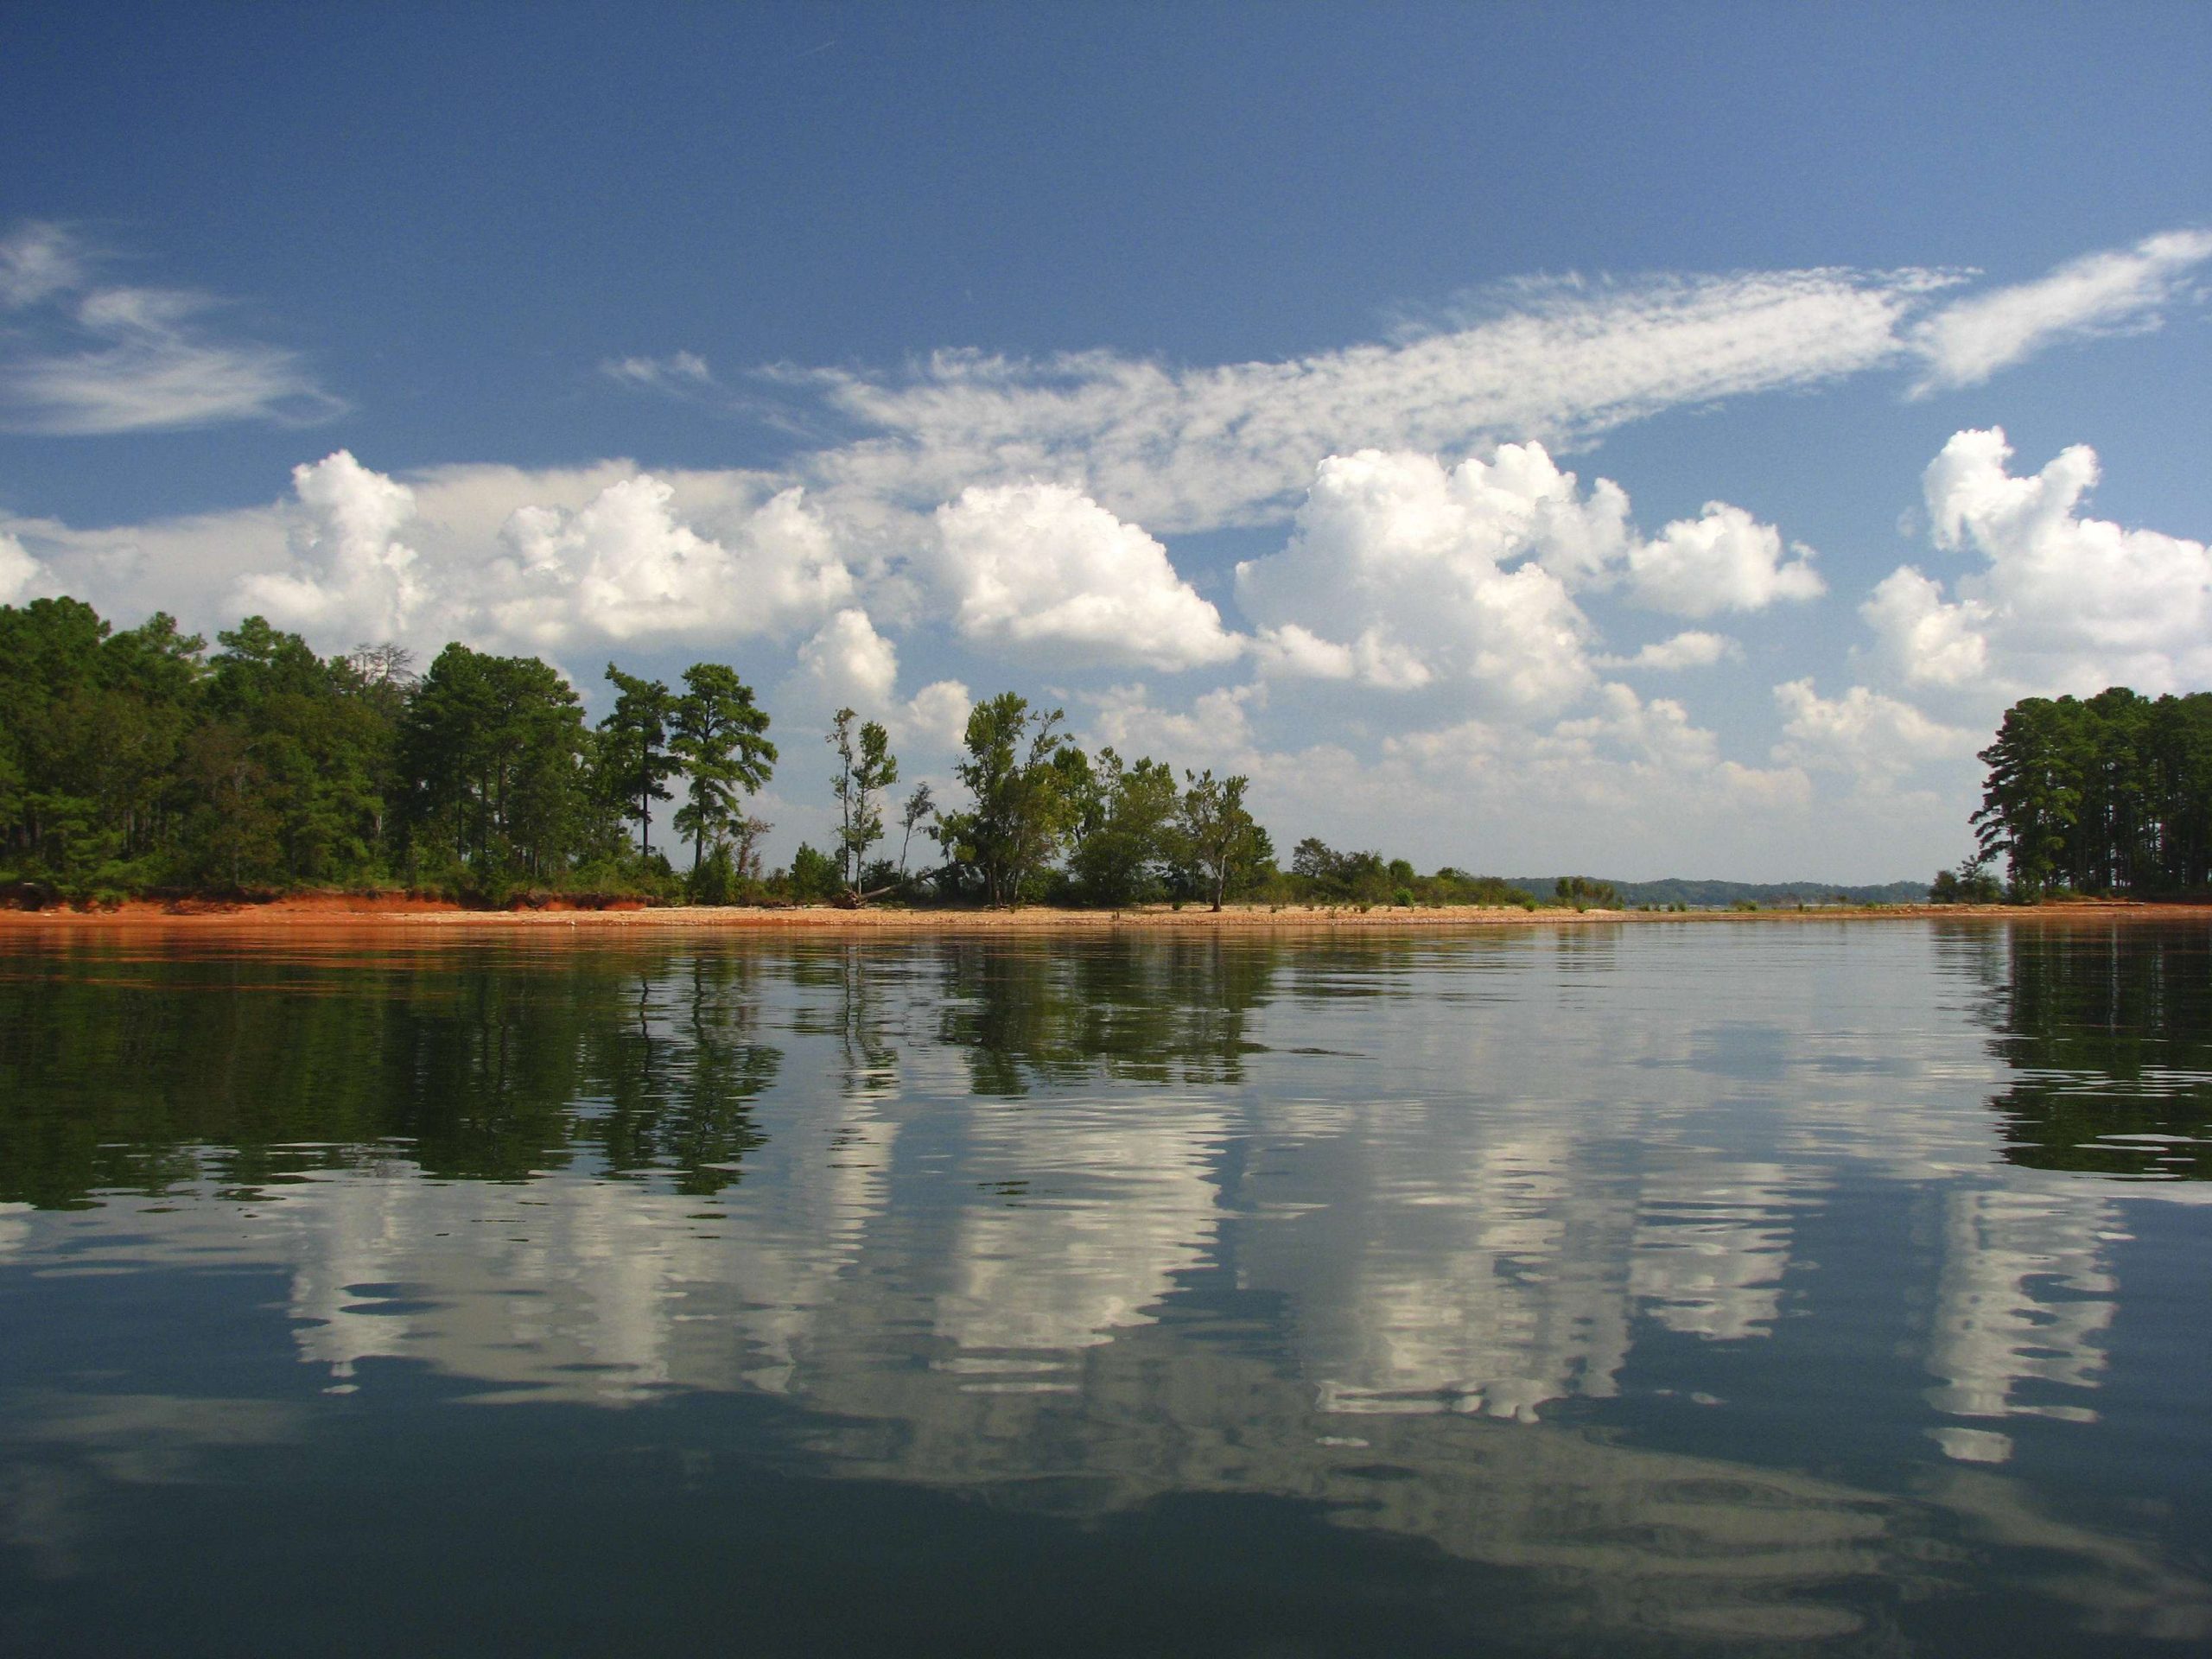 Lake Murray is in central South Carolina and 50,000 acres. When it was created in 1930, it was the world's largest man-made reservoir. 